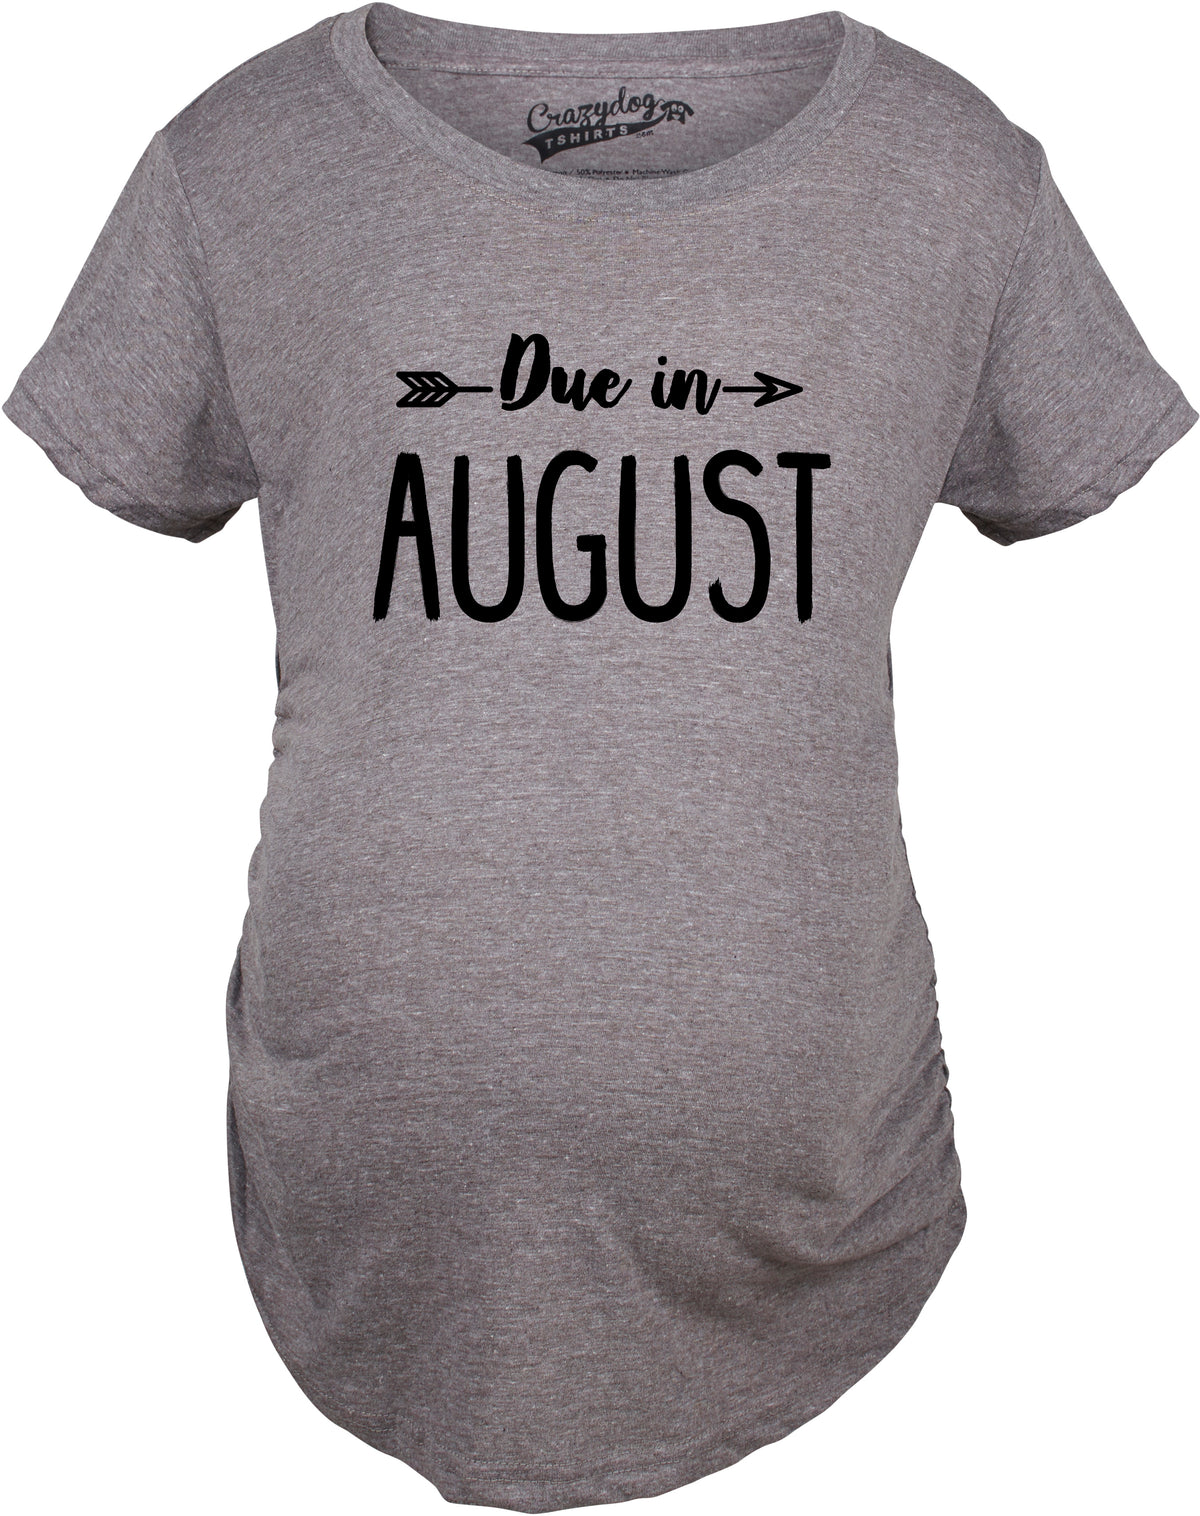 Funny Dark Heather Grey - August Due In Announcement Maternity T Shirt Nerdy Tee